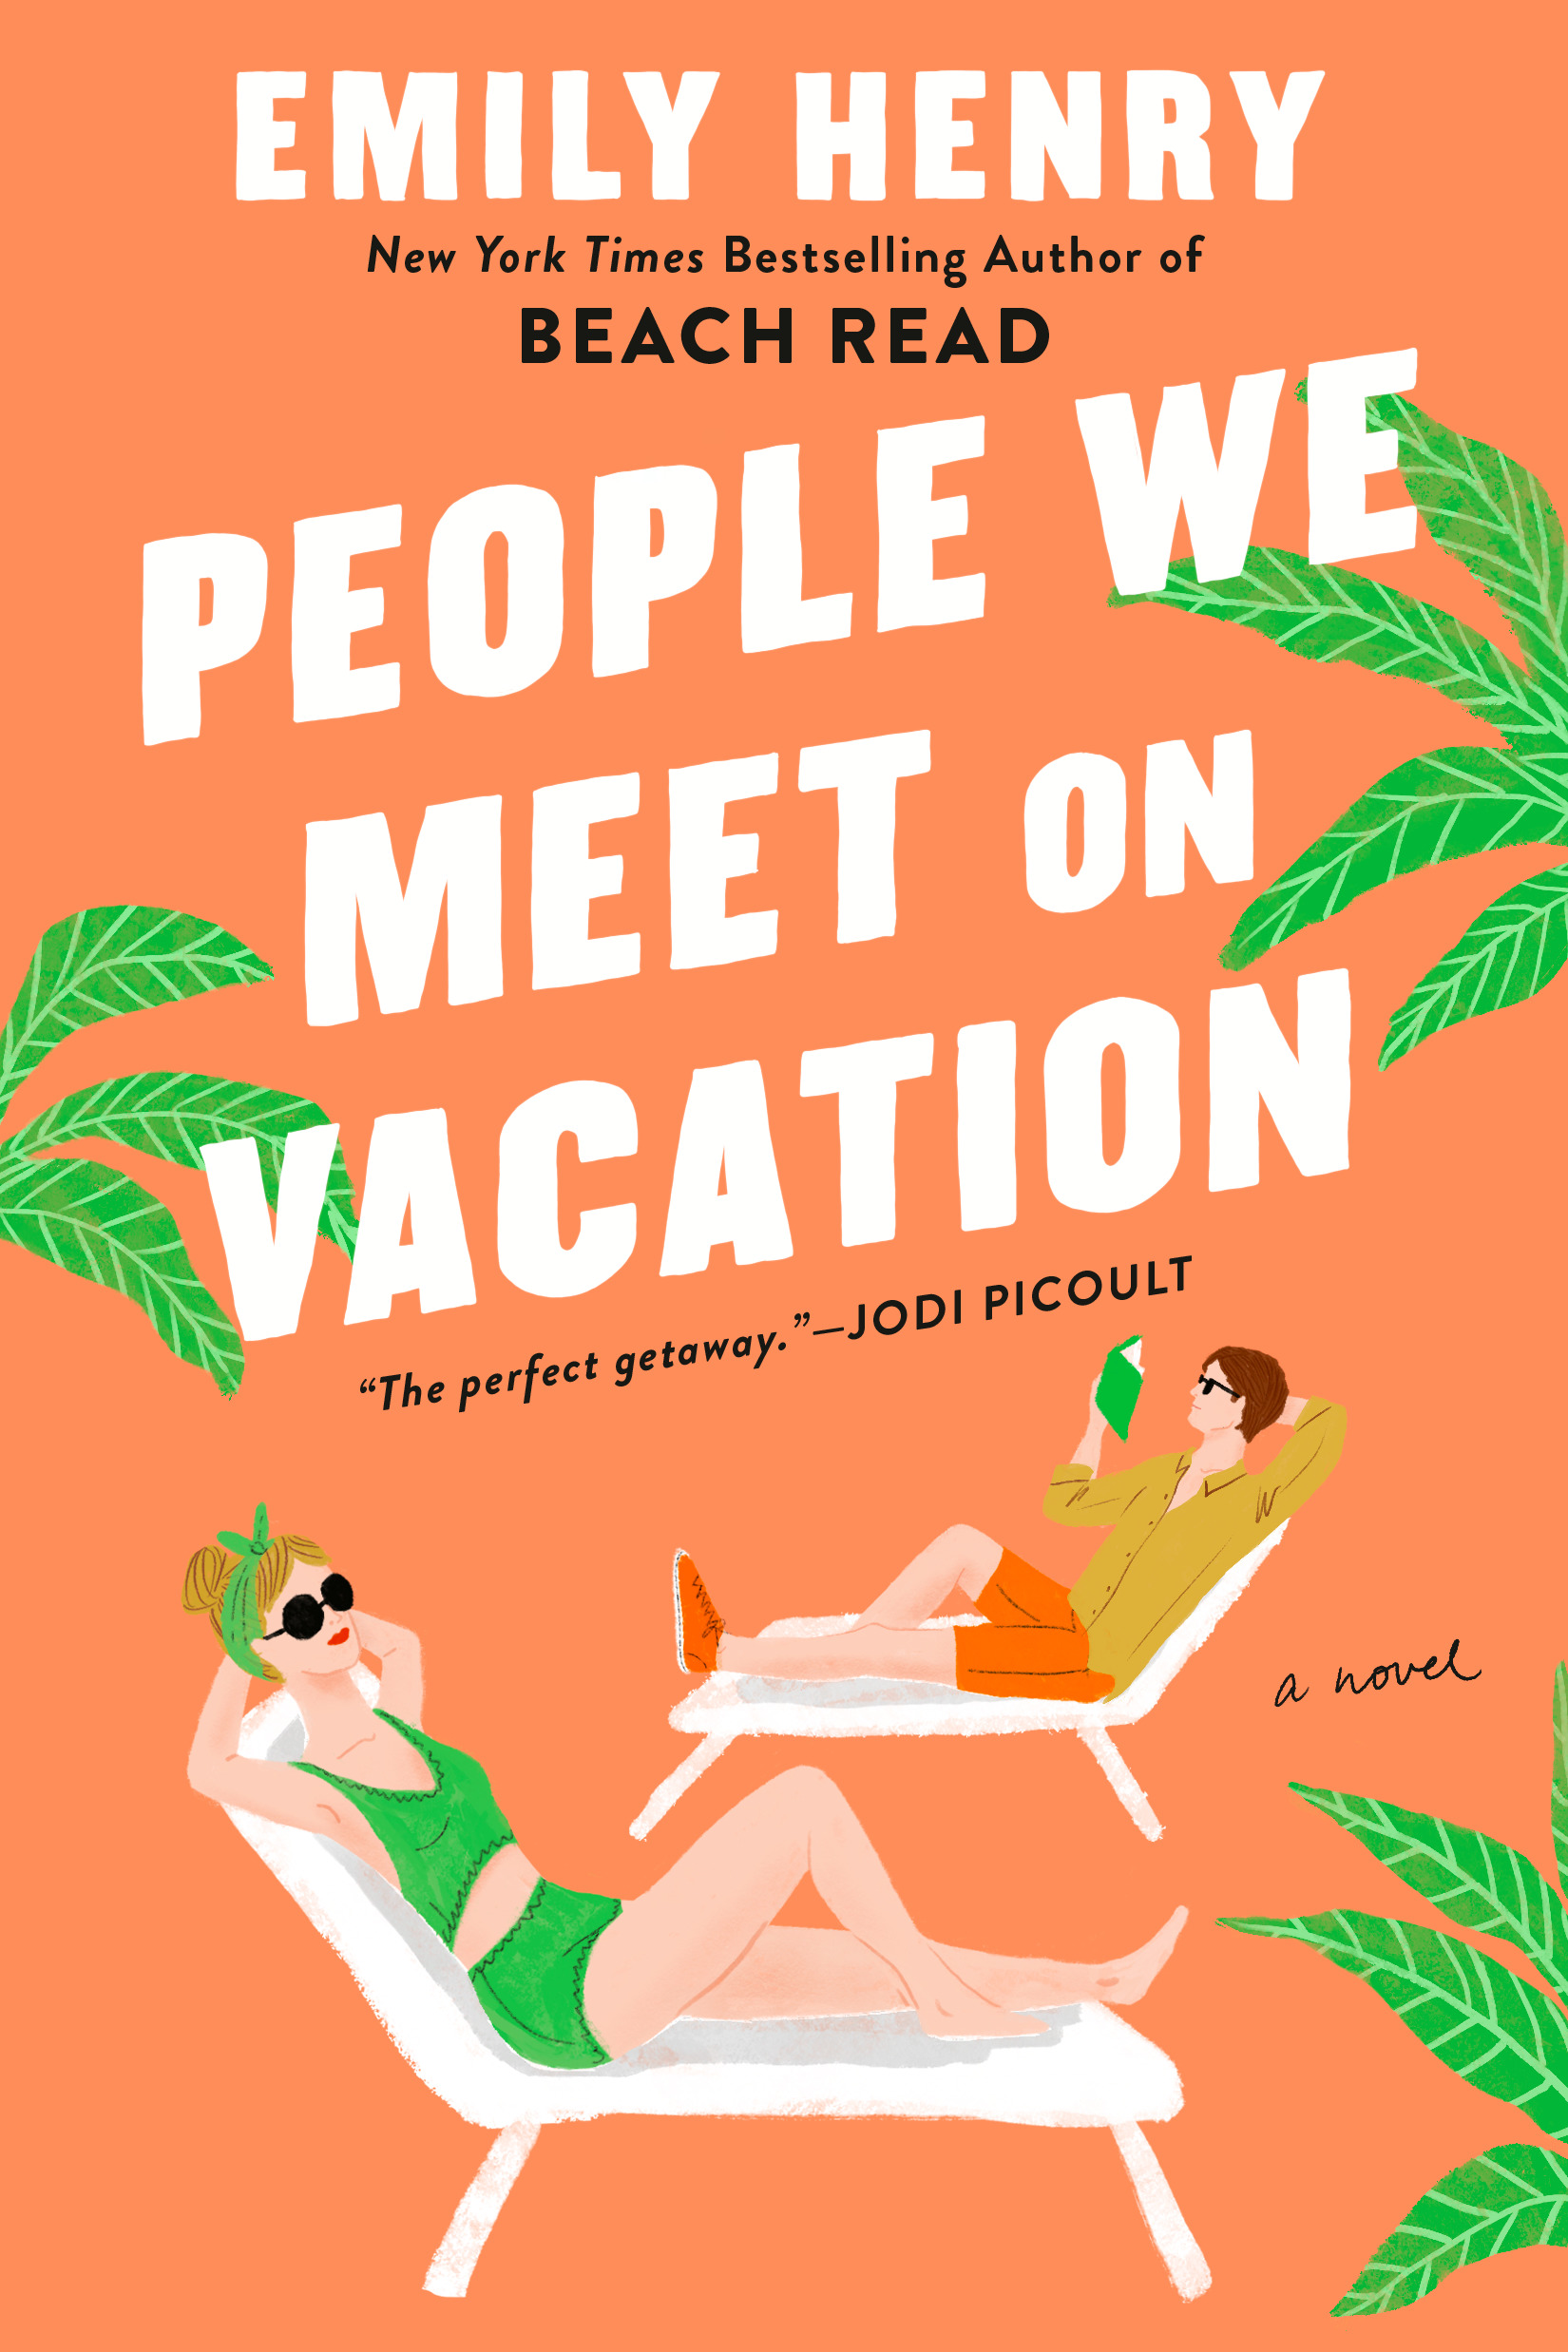 people we meet on vacation review